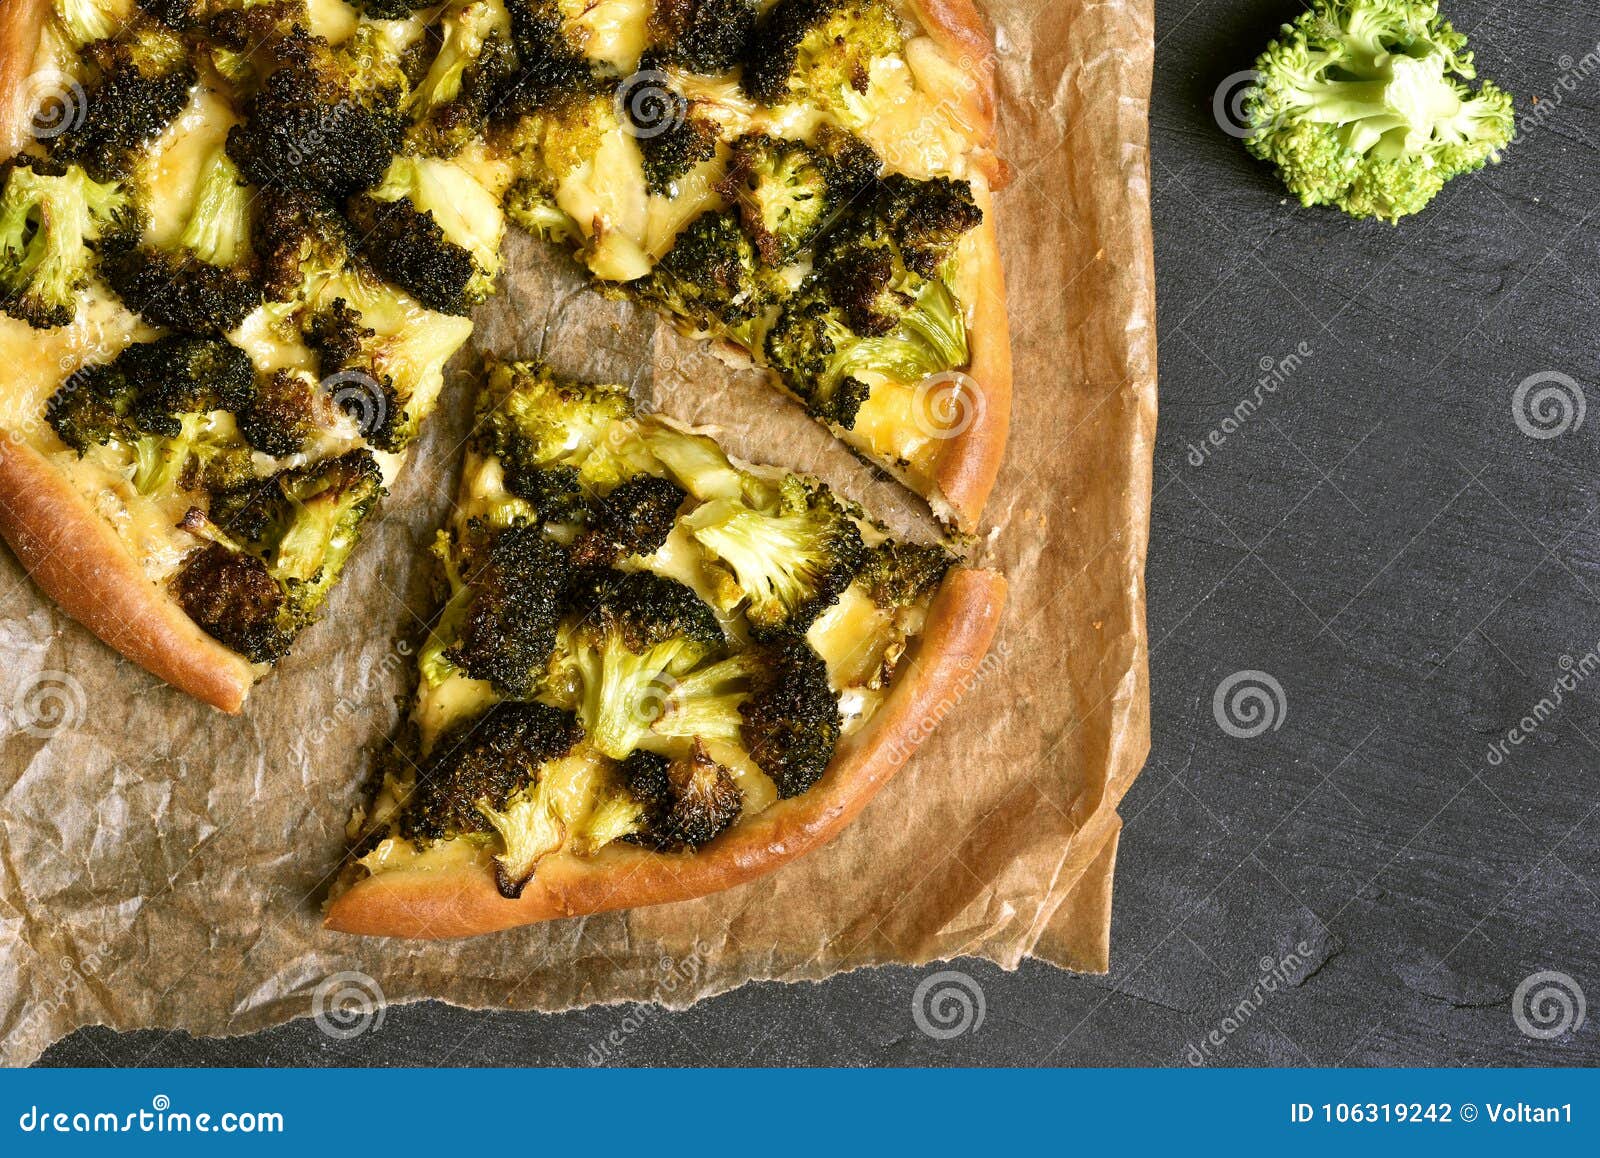 Sliced Pizza with Broccoli and Cheese Stock Photo - Image of flat, dish ...